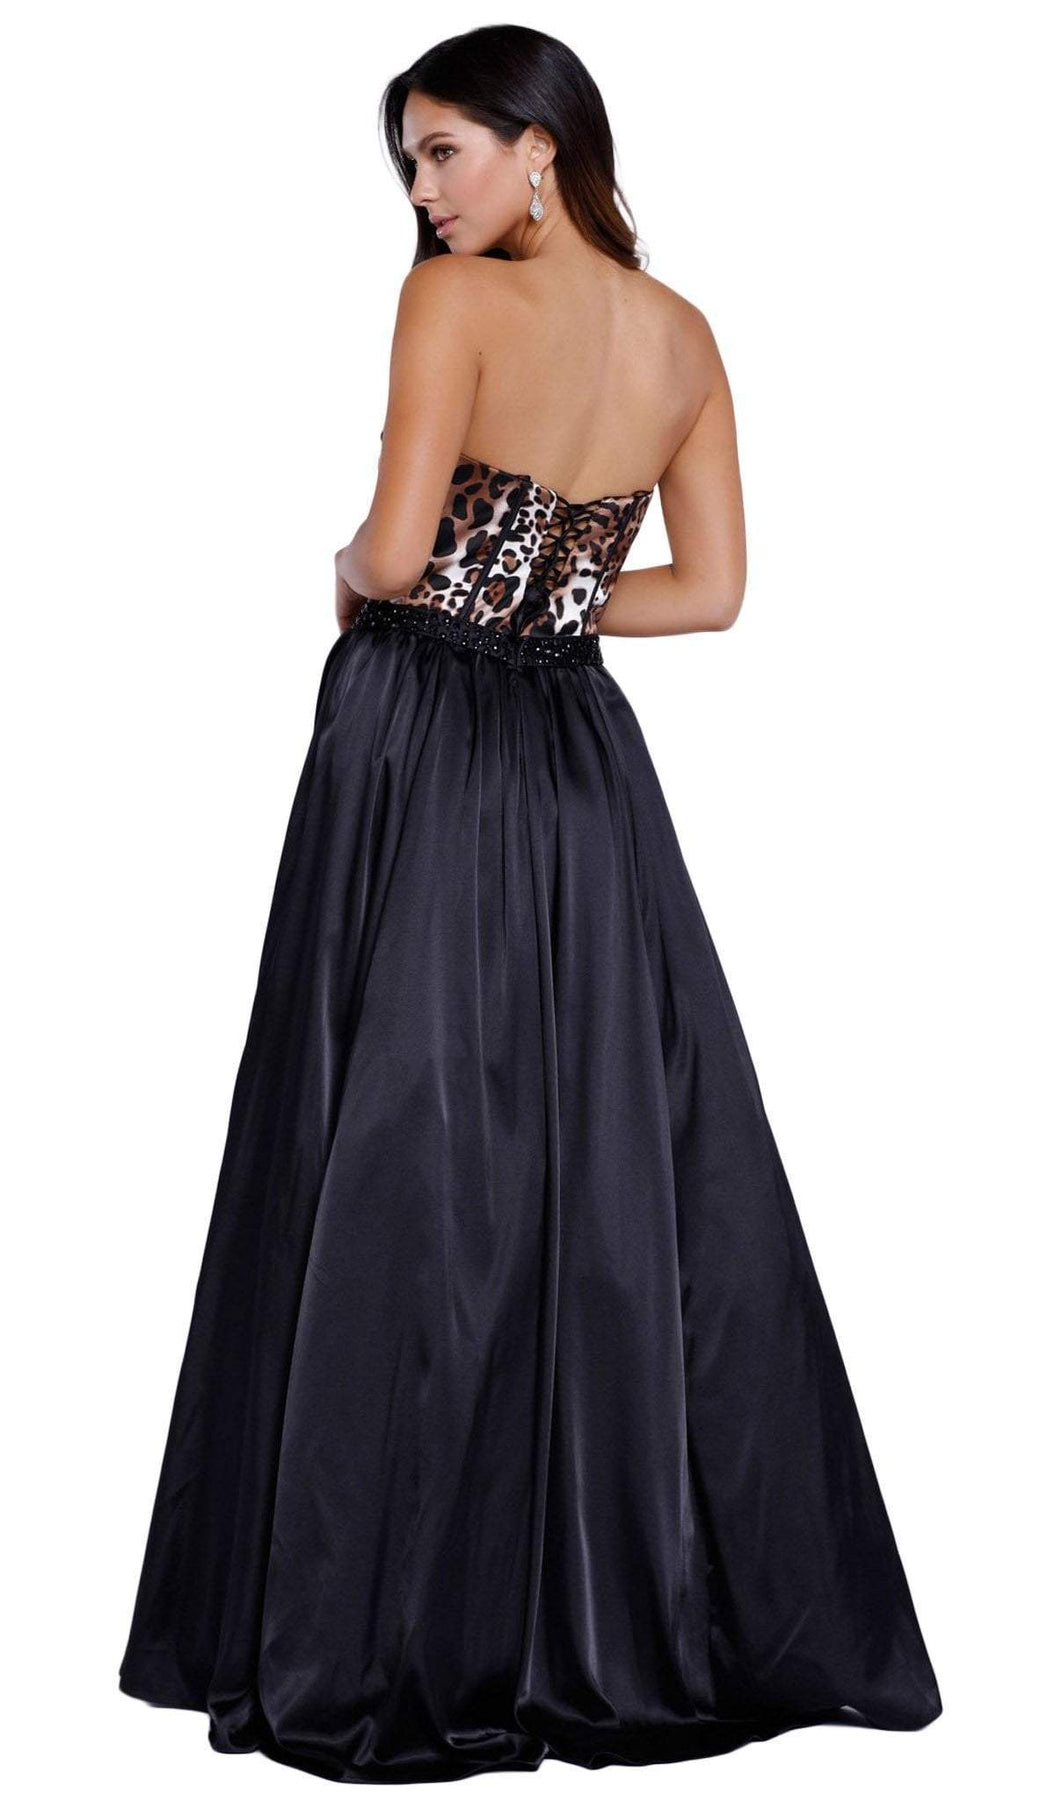 Nox Anabel - 8230 Corset Boned Leopard Print Evening Gown Special Occasion Dress